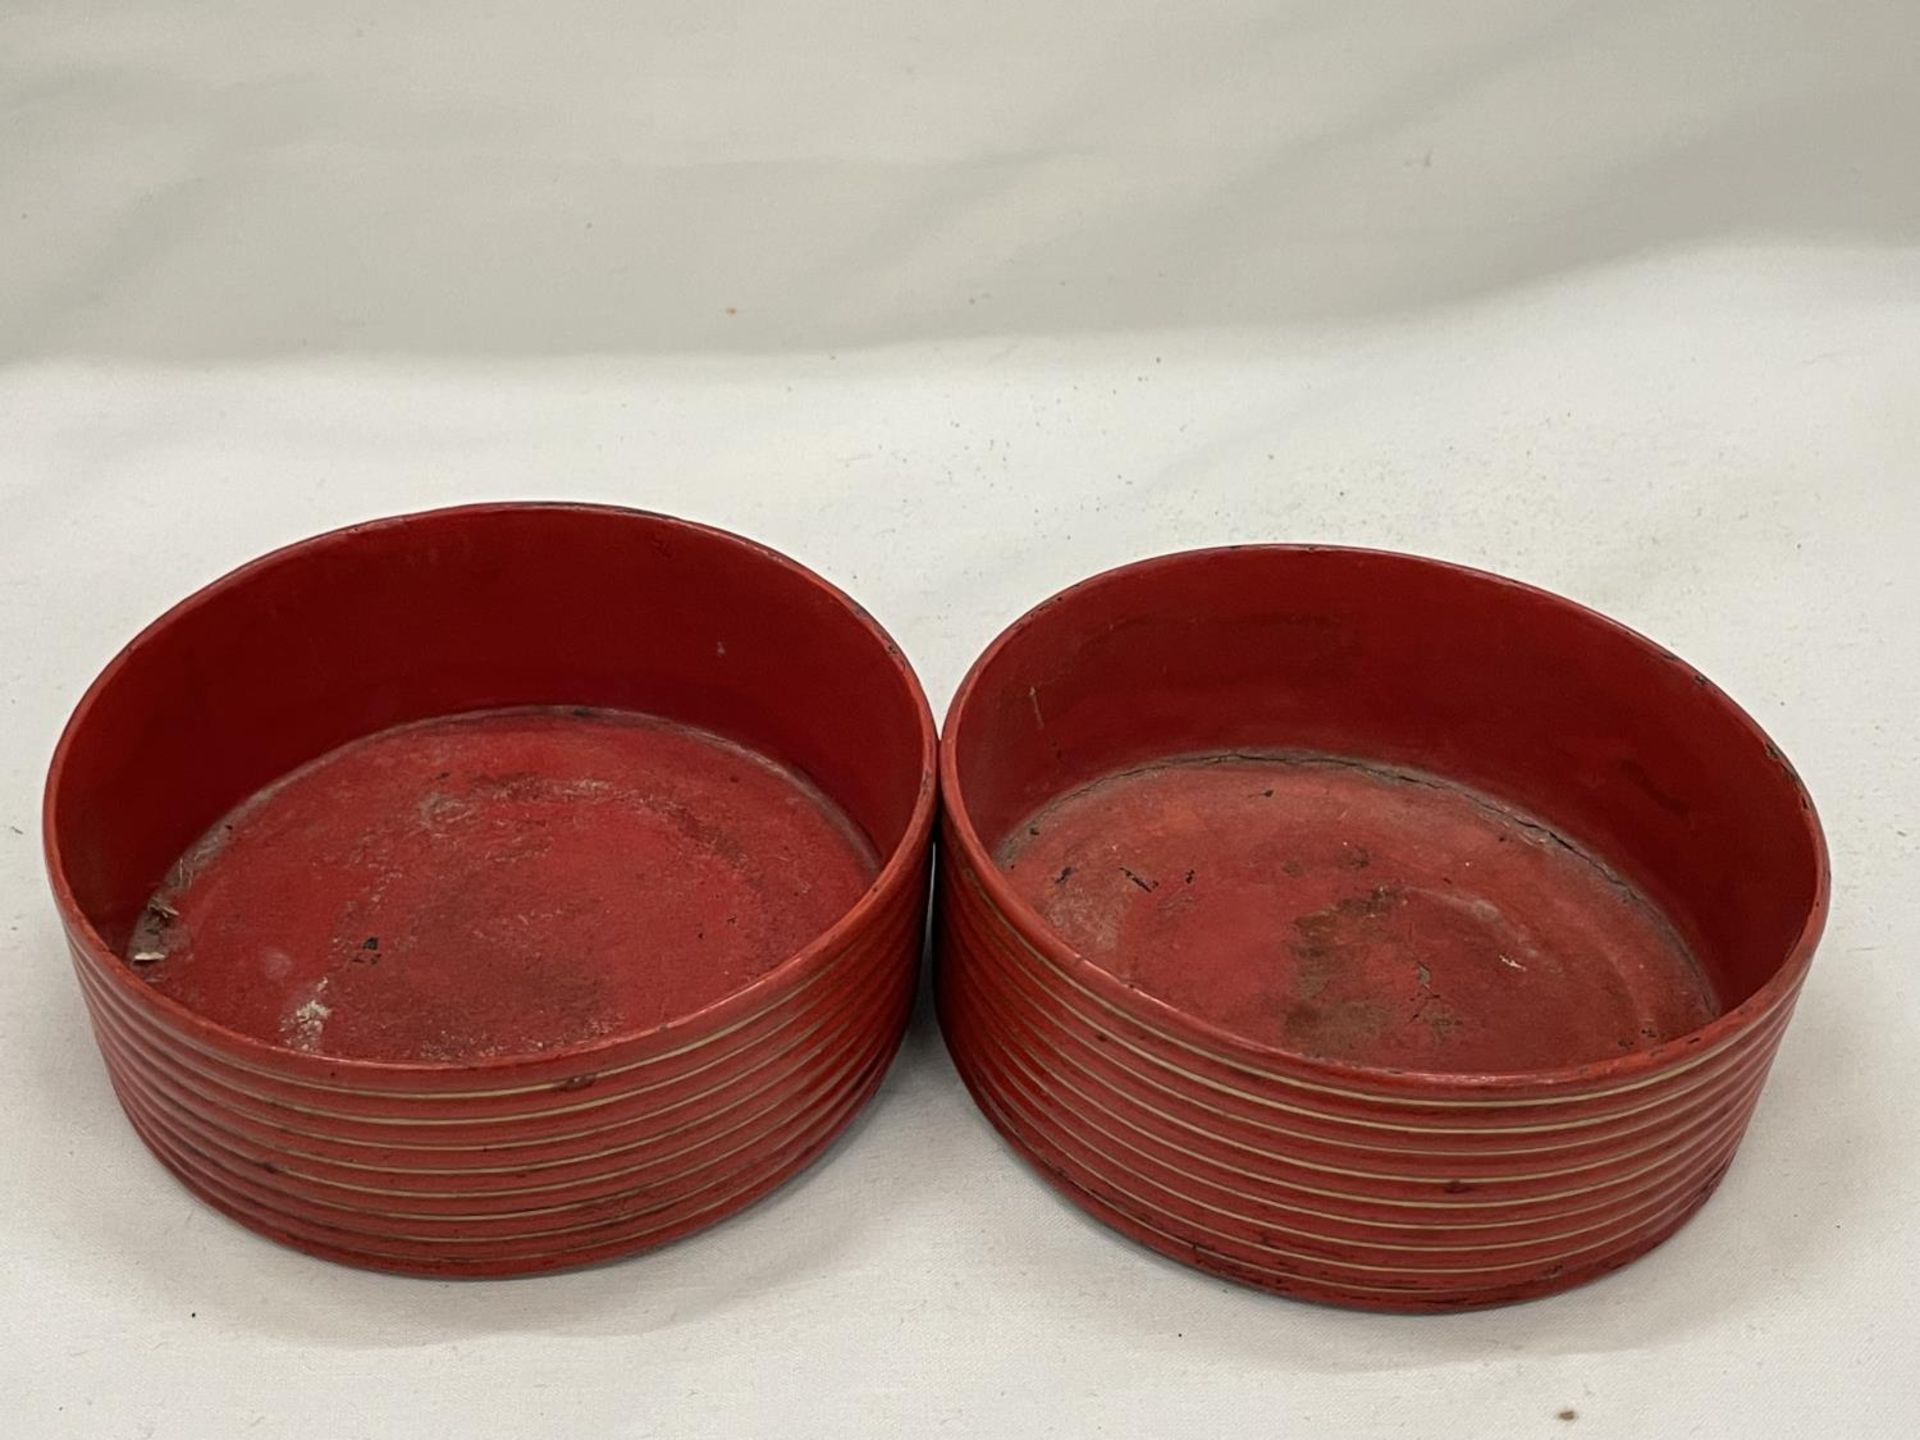 A PAIR OF BELIEVED ENGLISH REGENCY CIRCA 19TH CENTURY WINE COASTERS IN CINNABAR RED LACQUER